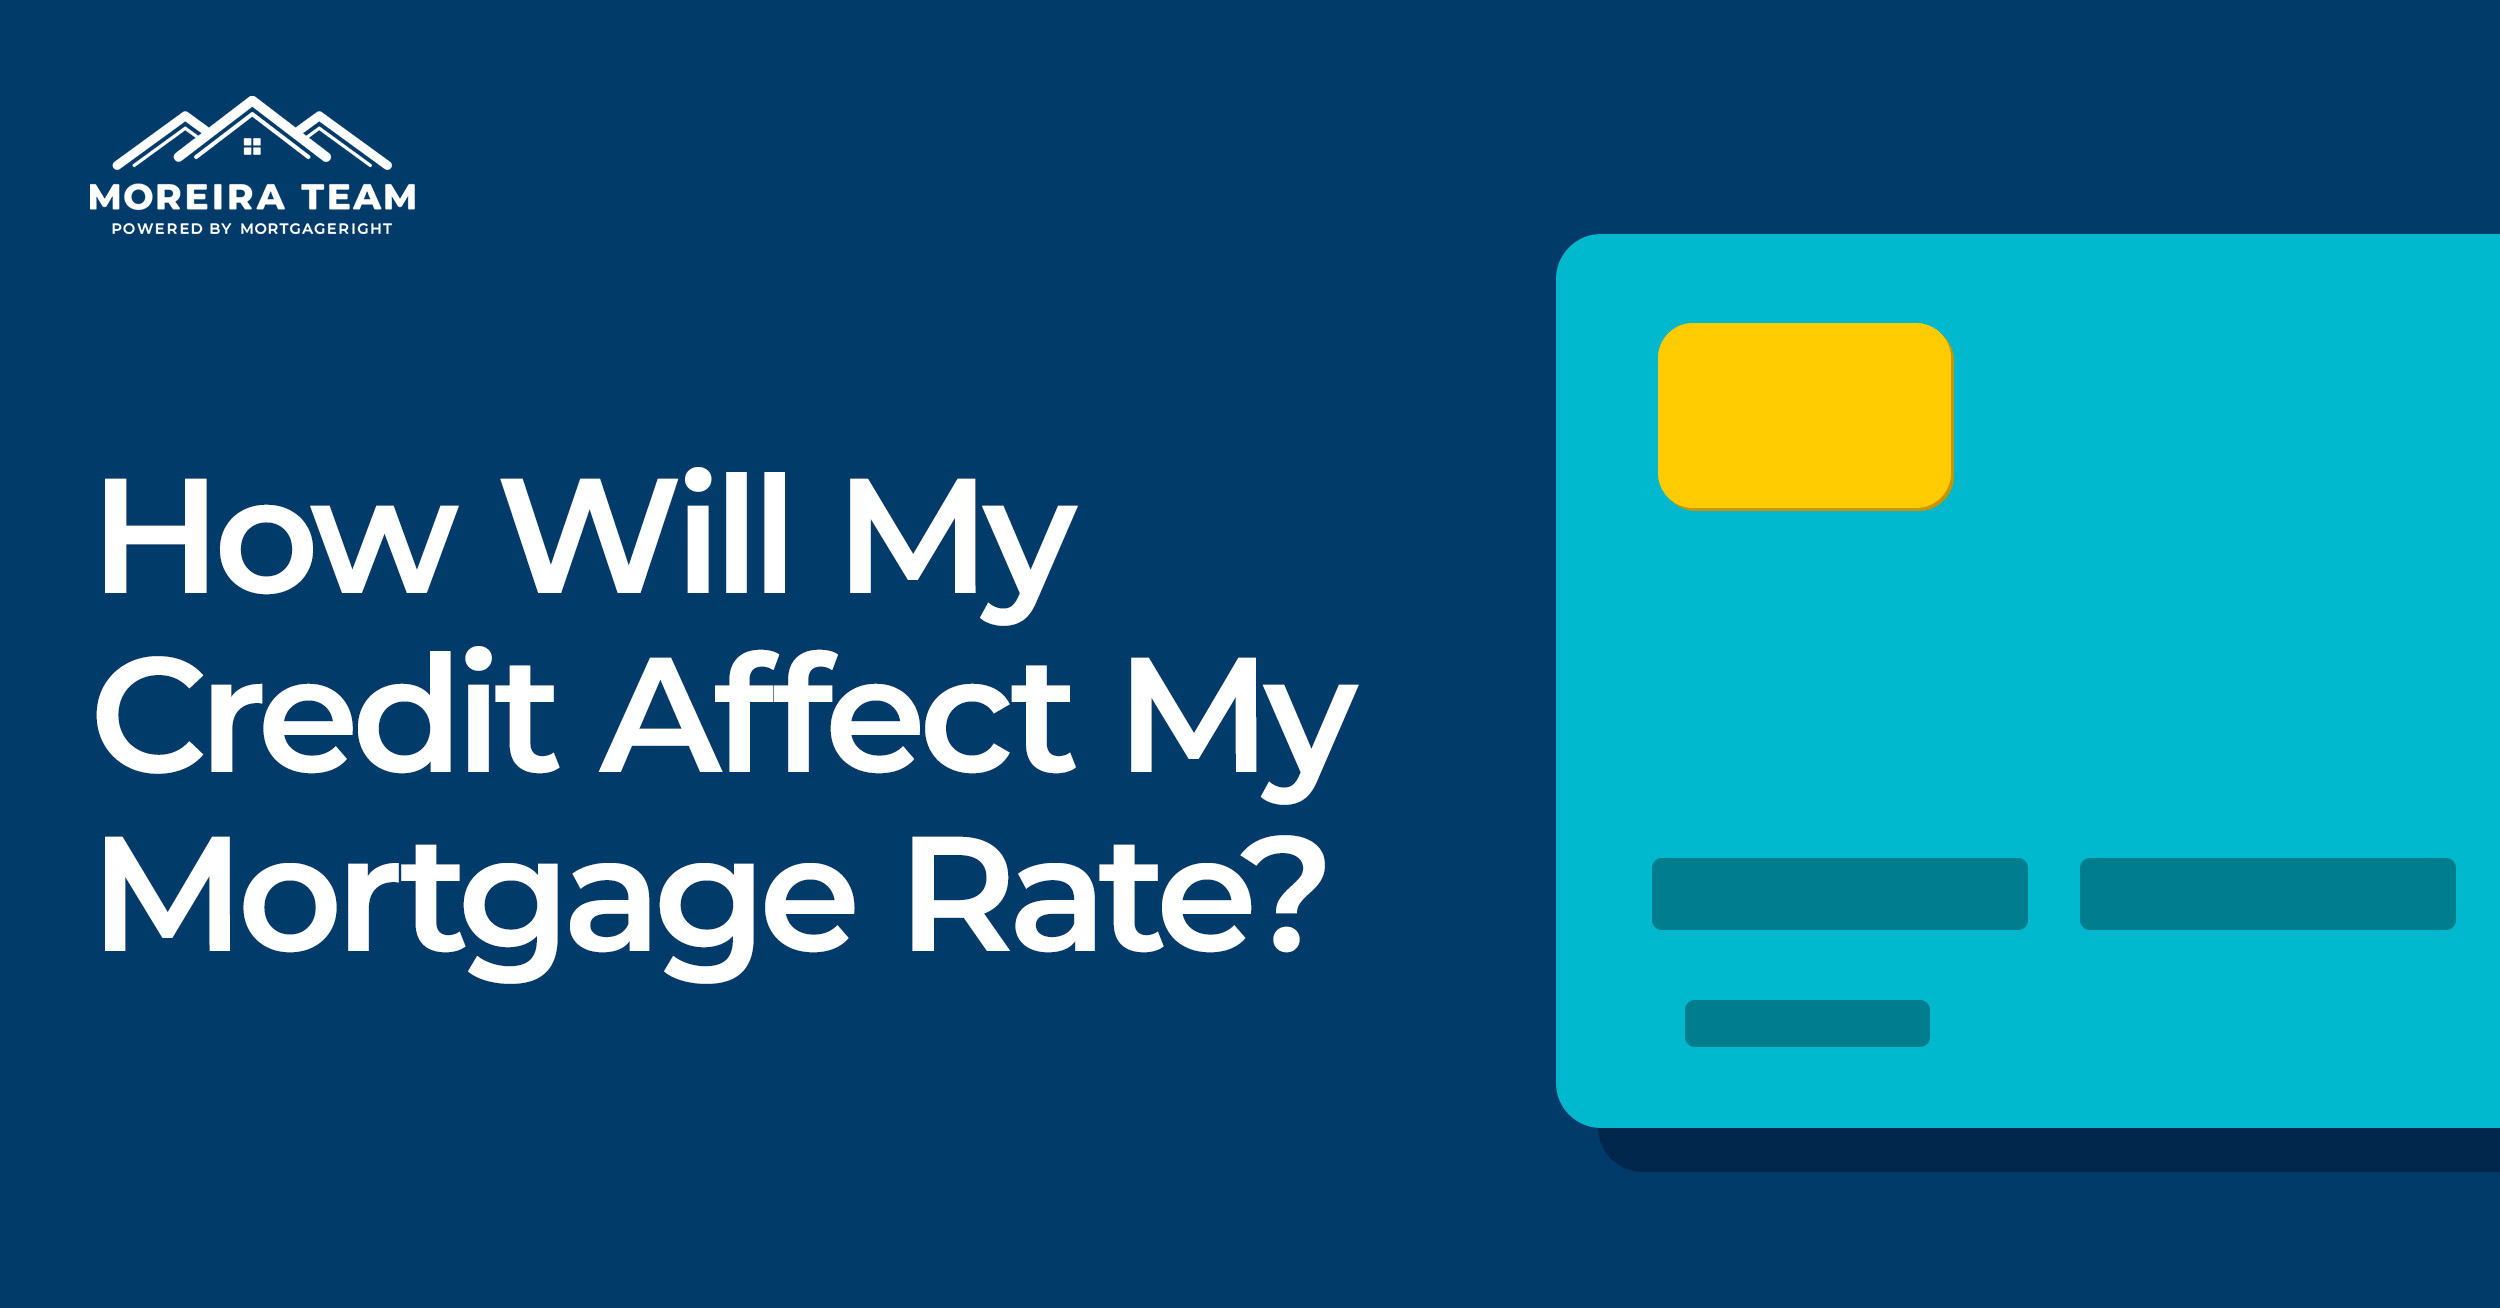 How will my credit score affect my mortgage rate?